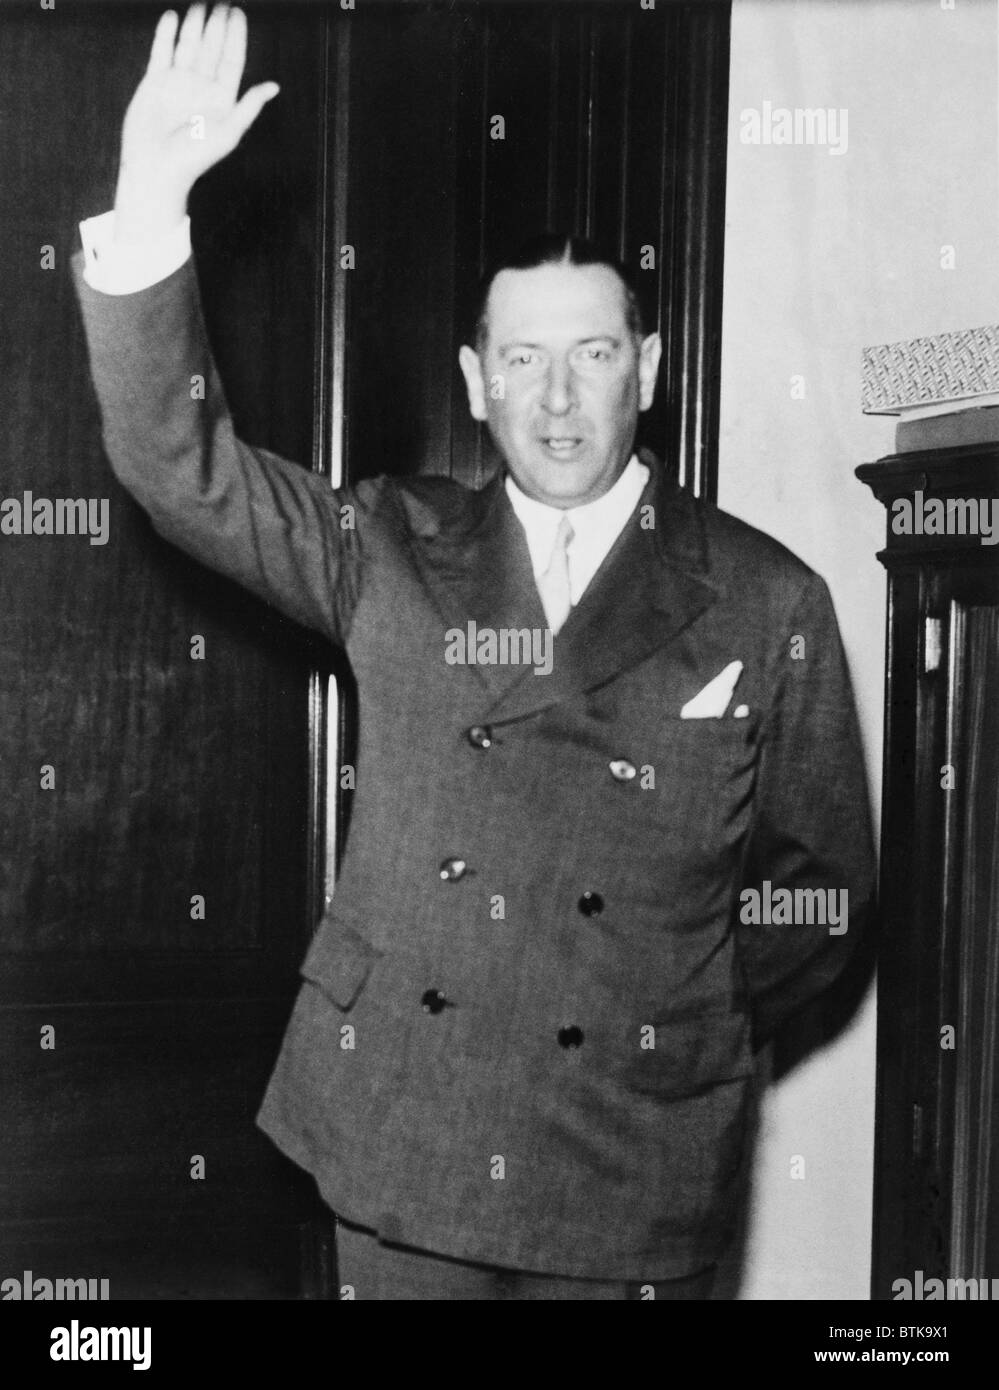 Richard Whitney (1888-1974), president of the New York Stock Exchange from 1930-35, takes an oath before testifying before the Senate Committee on Banking and Currency Investigation of Wall Street. Whitney would later serve a prison term for an unrelated embezzlement. 1932. Stock Photo